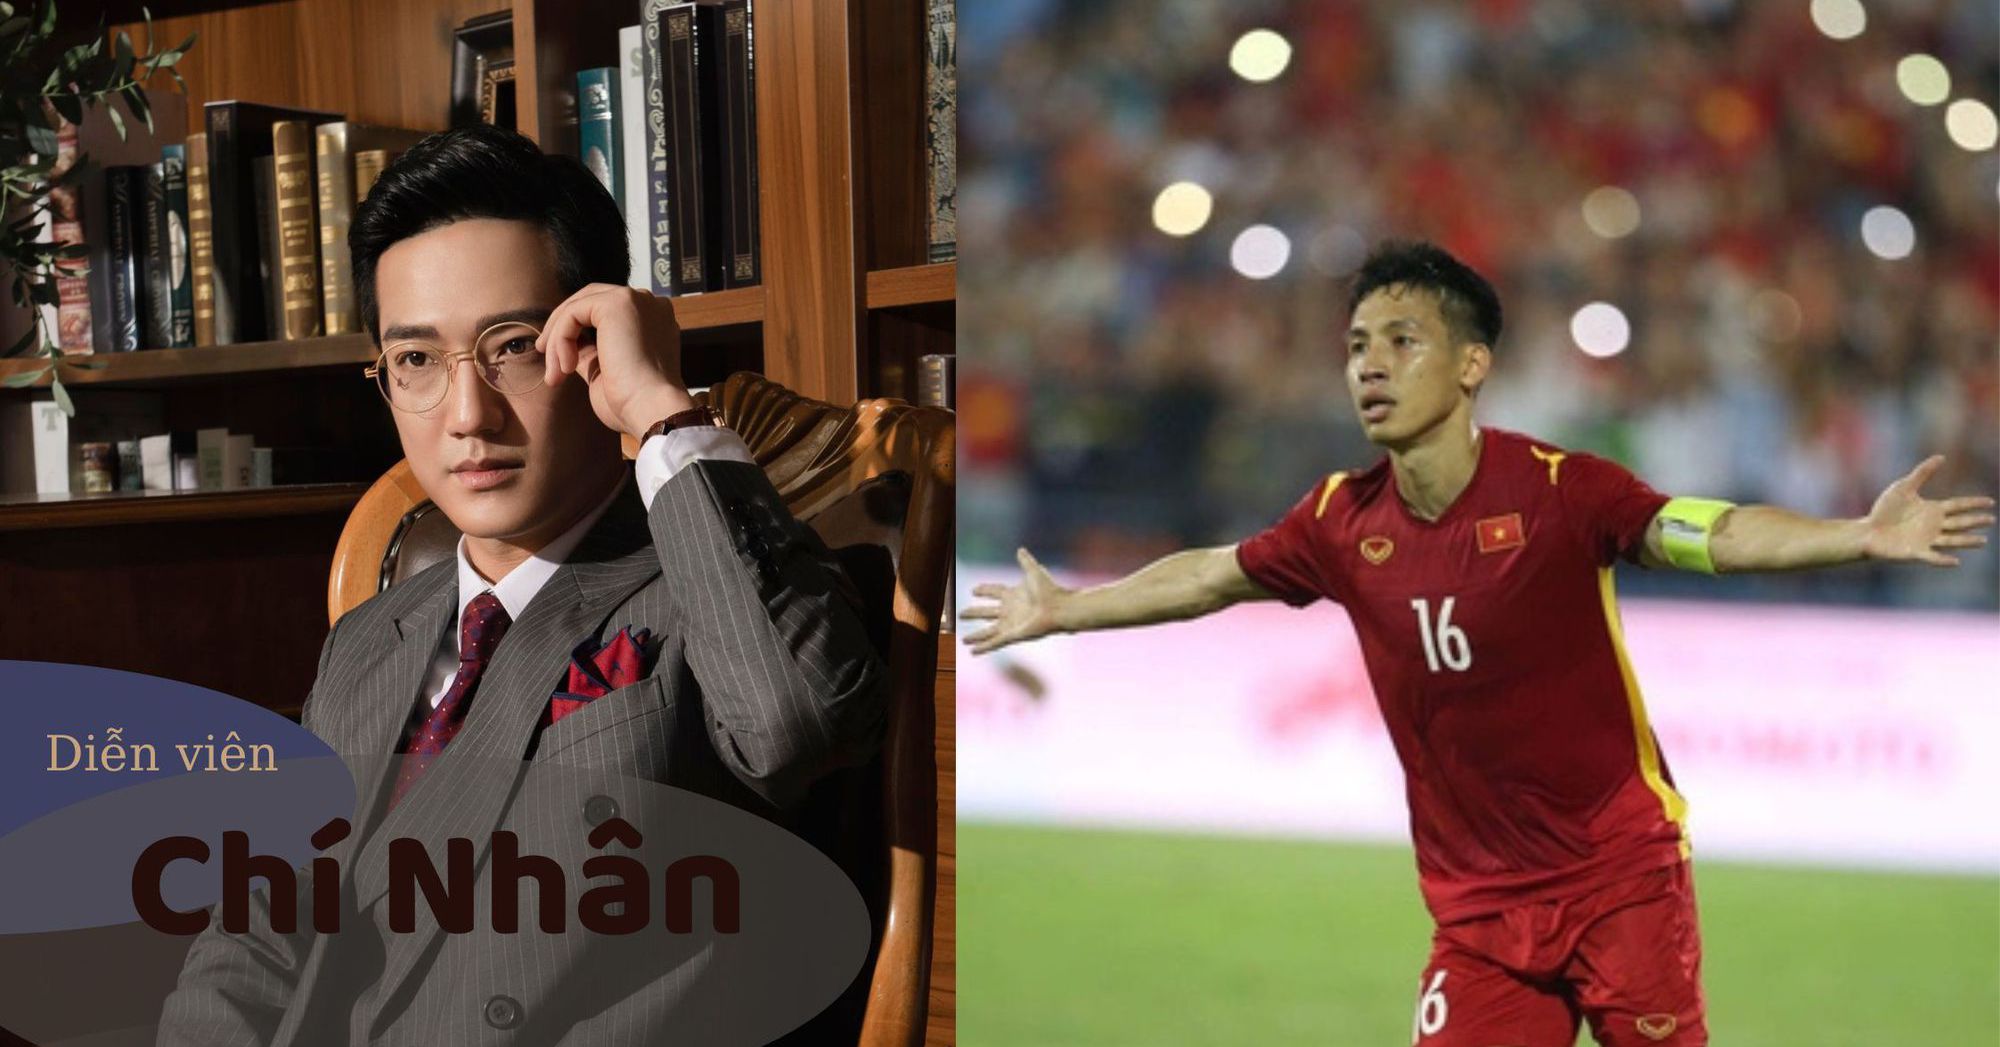 Chi Nhan: “I believe U23 Vietnam will beat Malaysia U23 even if it takes more than 90 minutes to play”